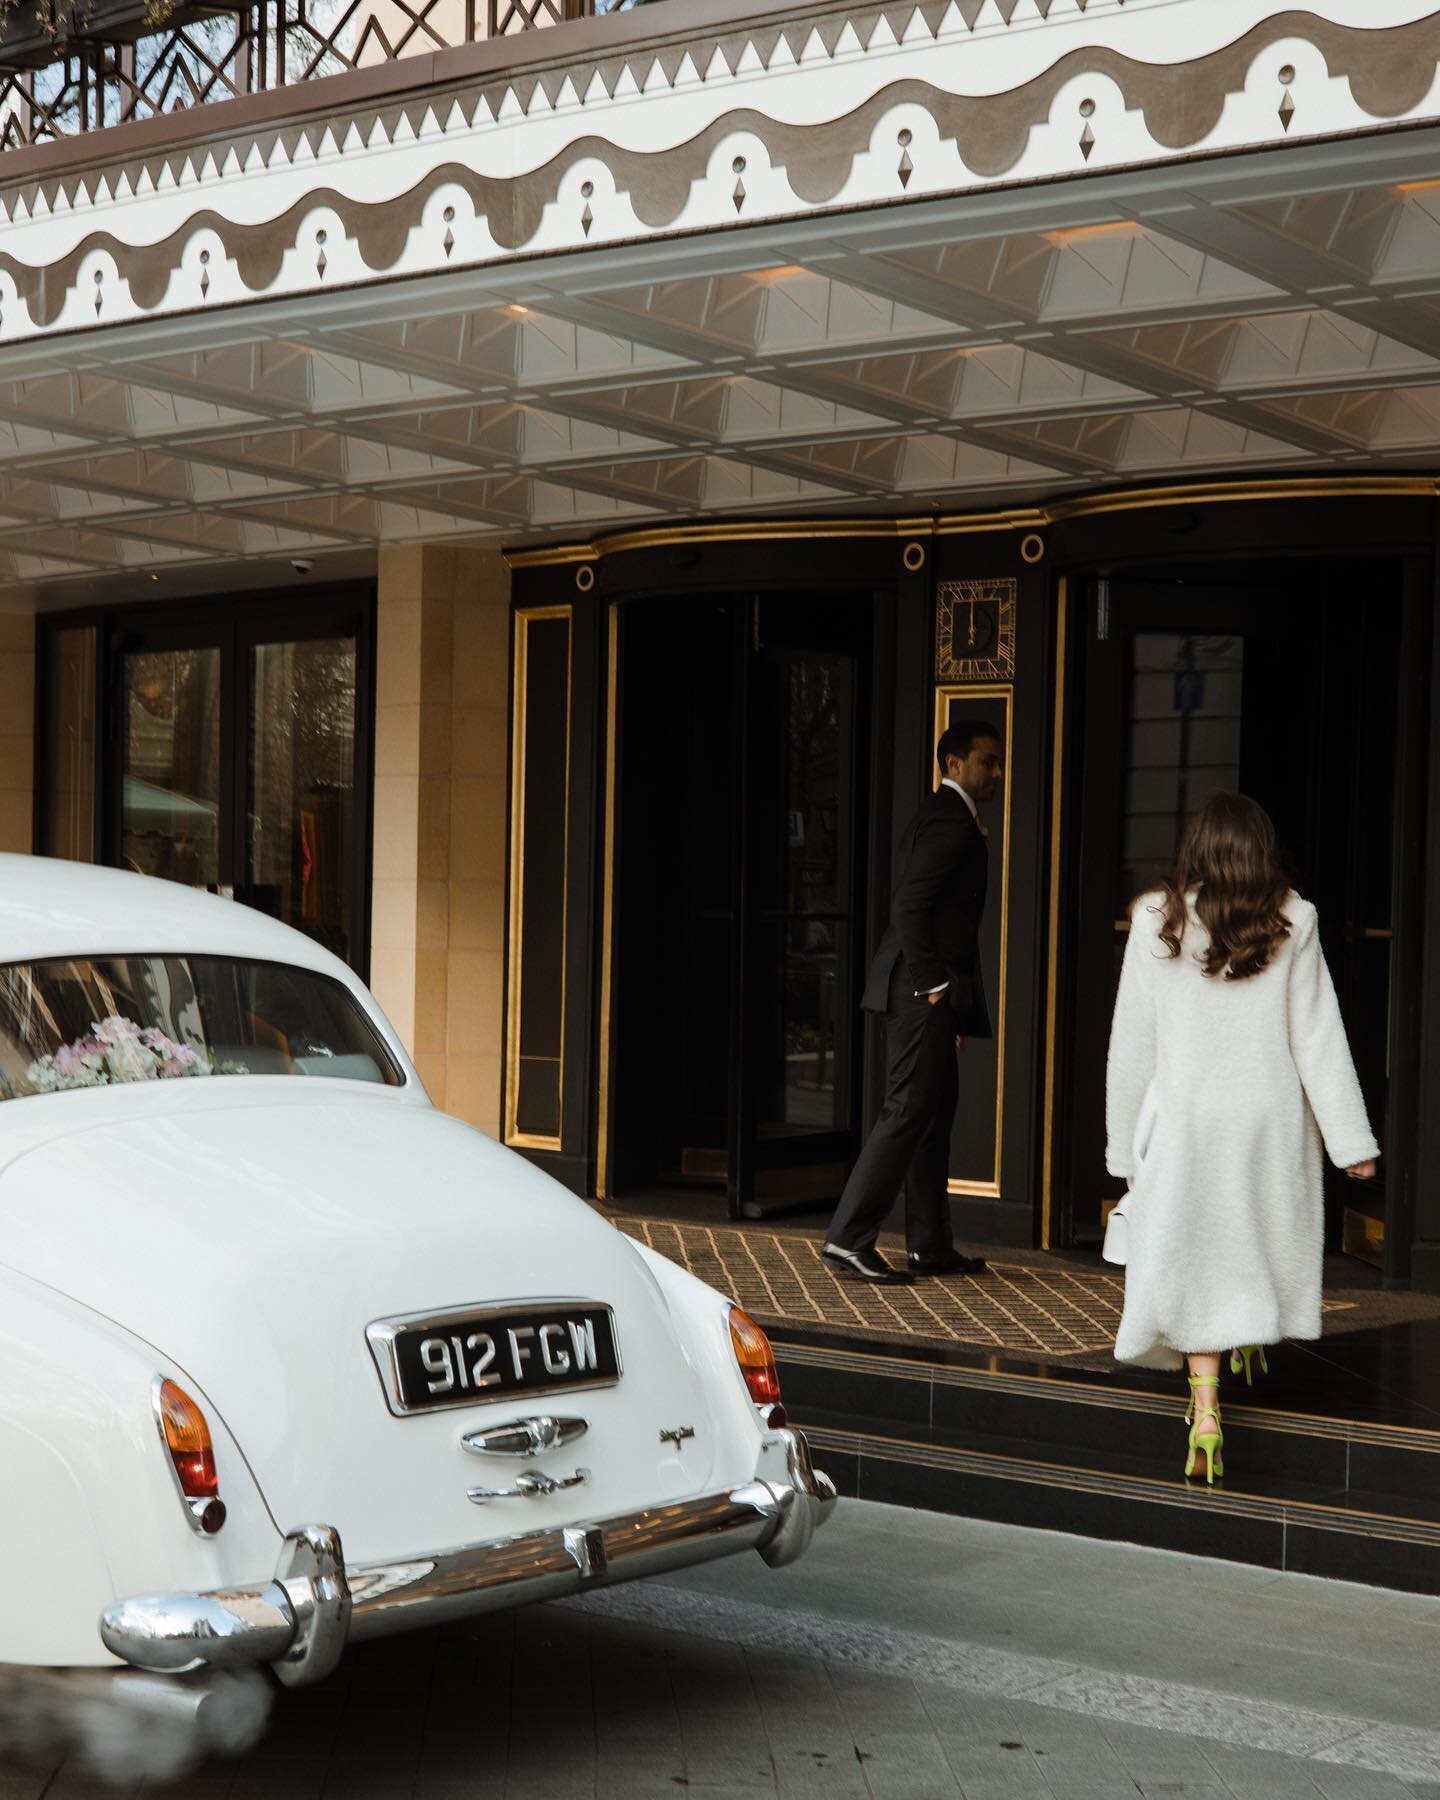 Feeling like moments taken out of the 60s. An era that really inspires me. 📸 

#thedorchester #classiccar #londonwedding #londonweddingphotographer #oldmarylebonetownhallwedding #marylebonetownhall #marylebonetownhallwedding #londonweddingphotograph